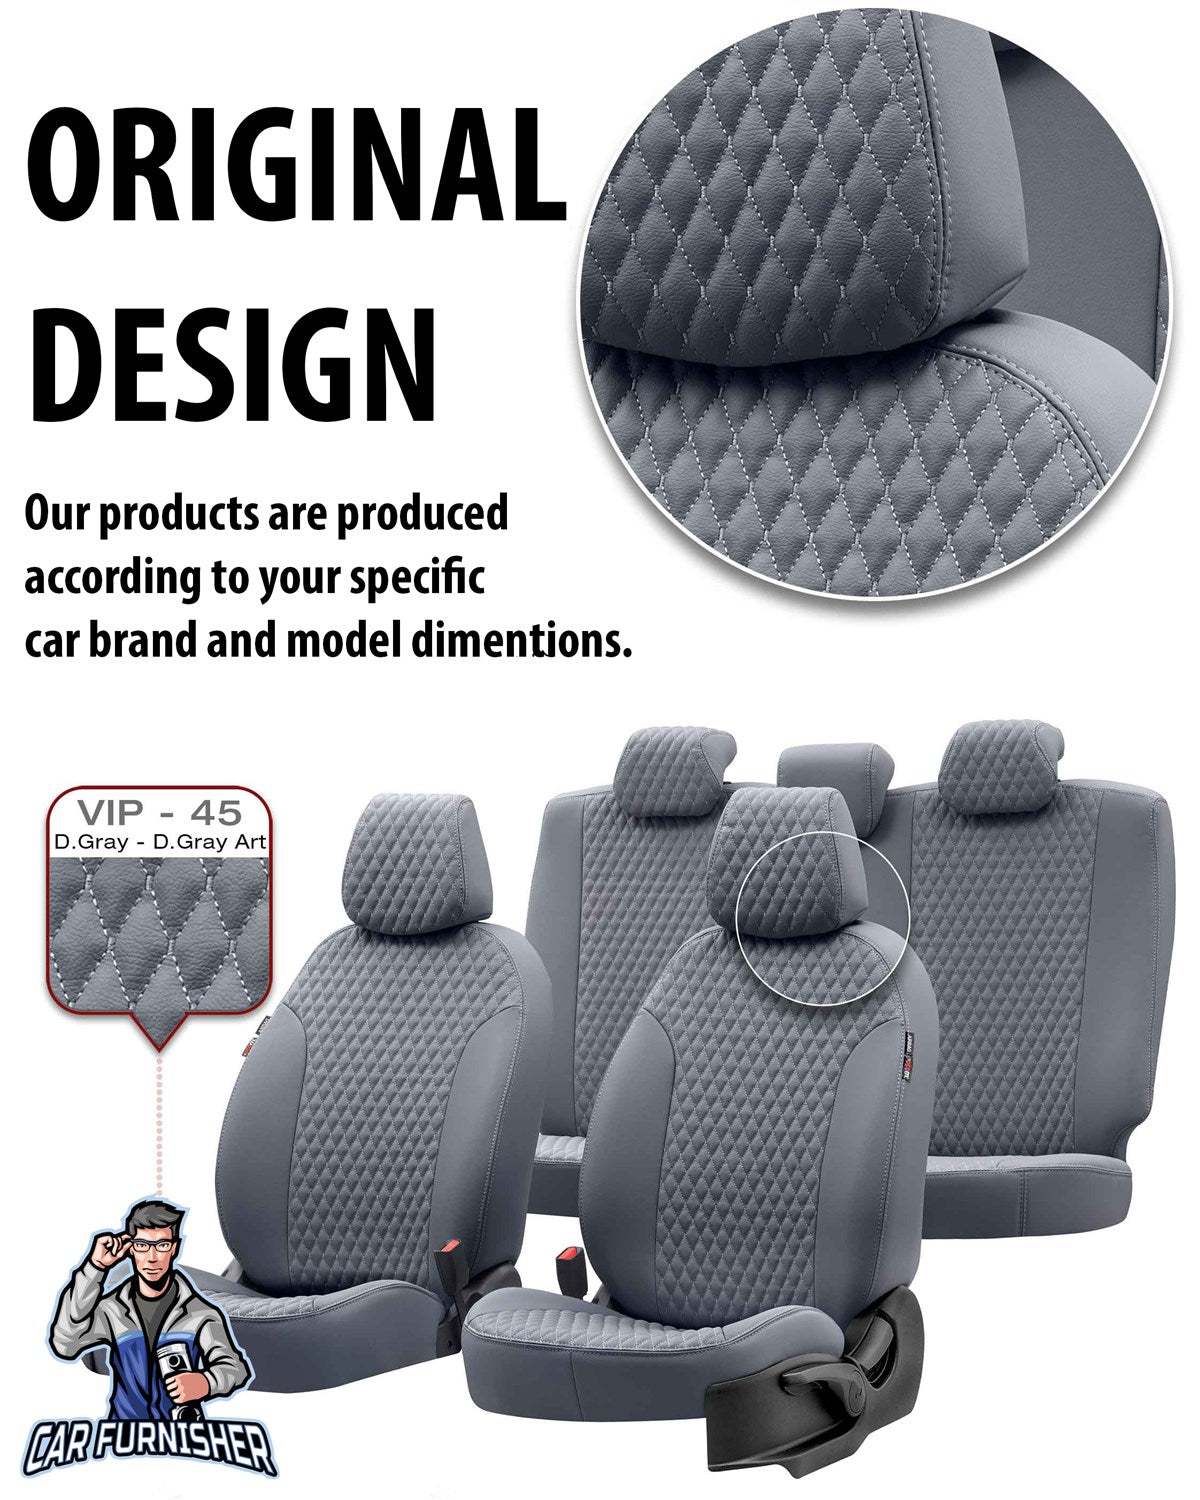 Toyota Proace City Seat Covers Amsterdam Leather Design Black Leather